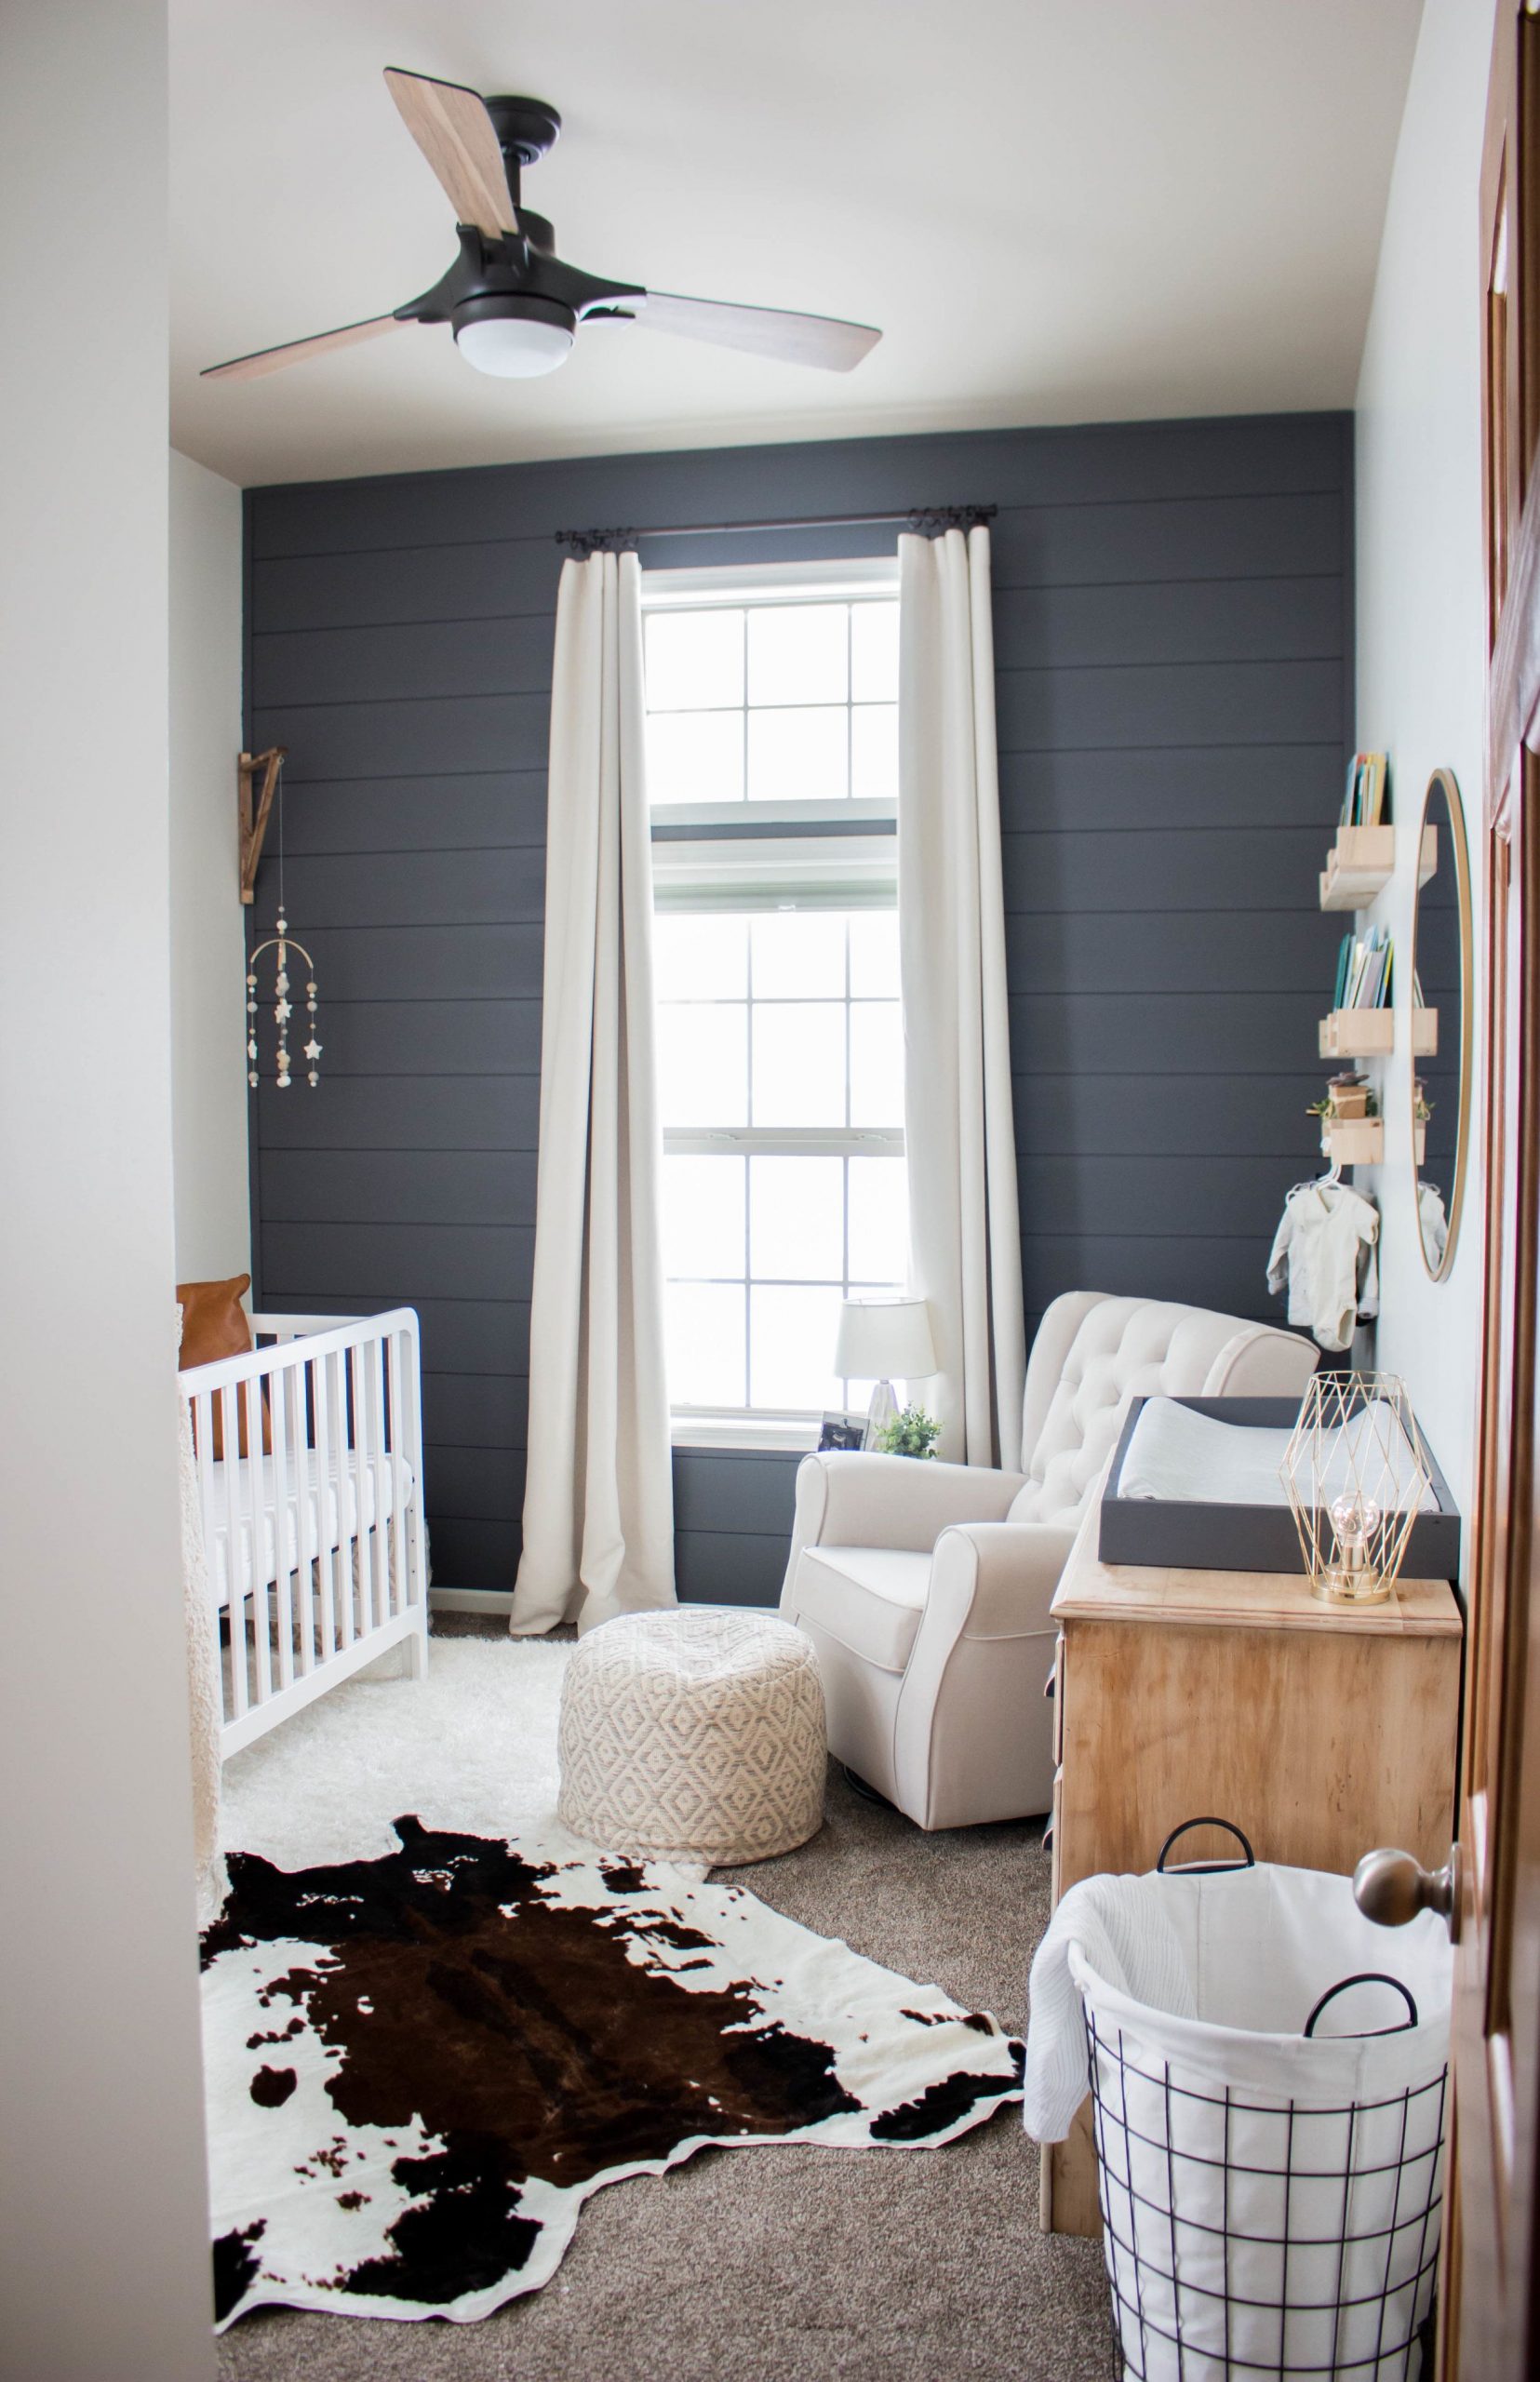 Baby boy nursery with modern farm house vibes. Gray accent wall really make the ...